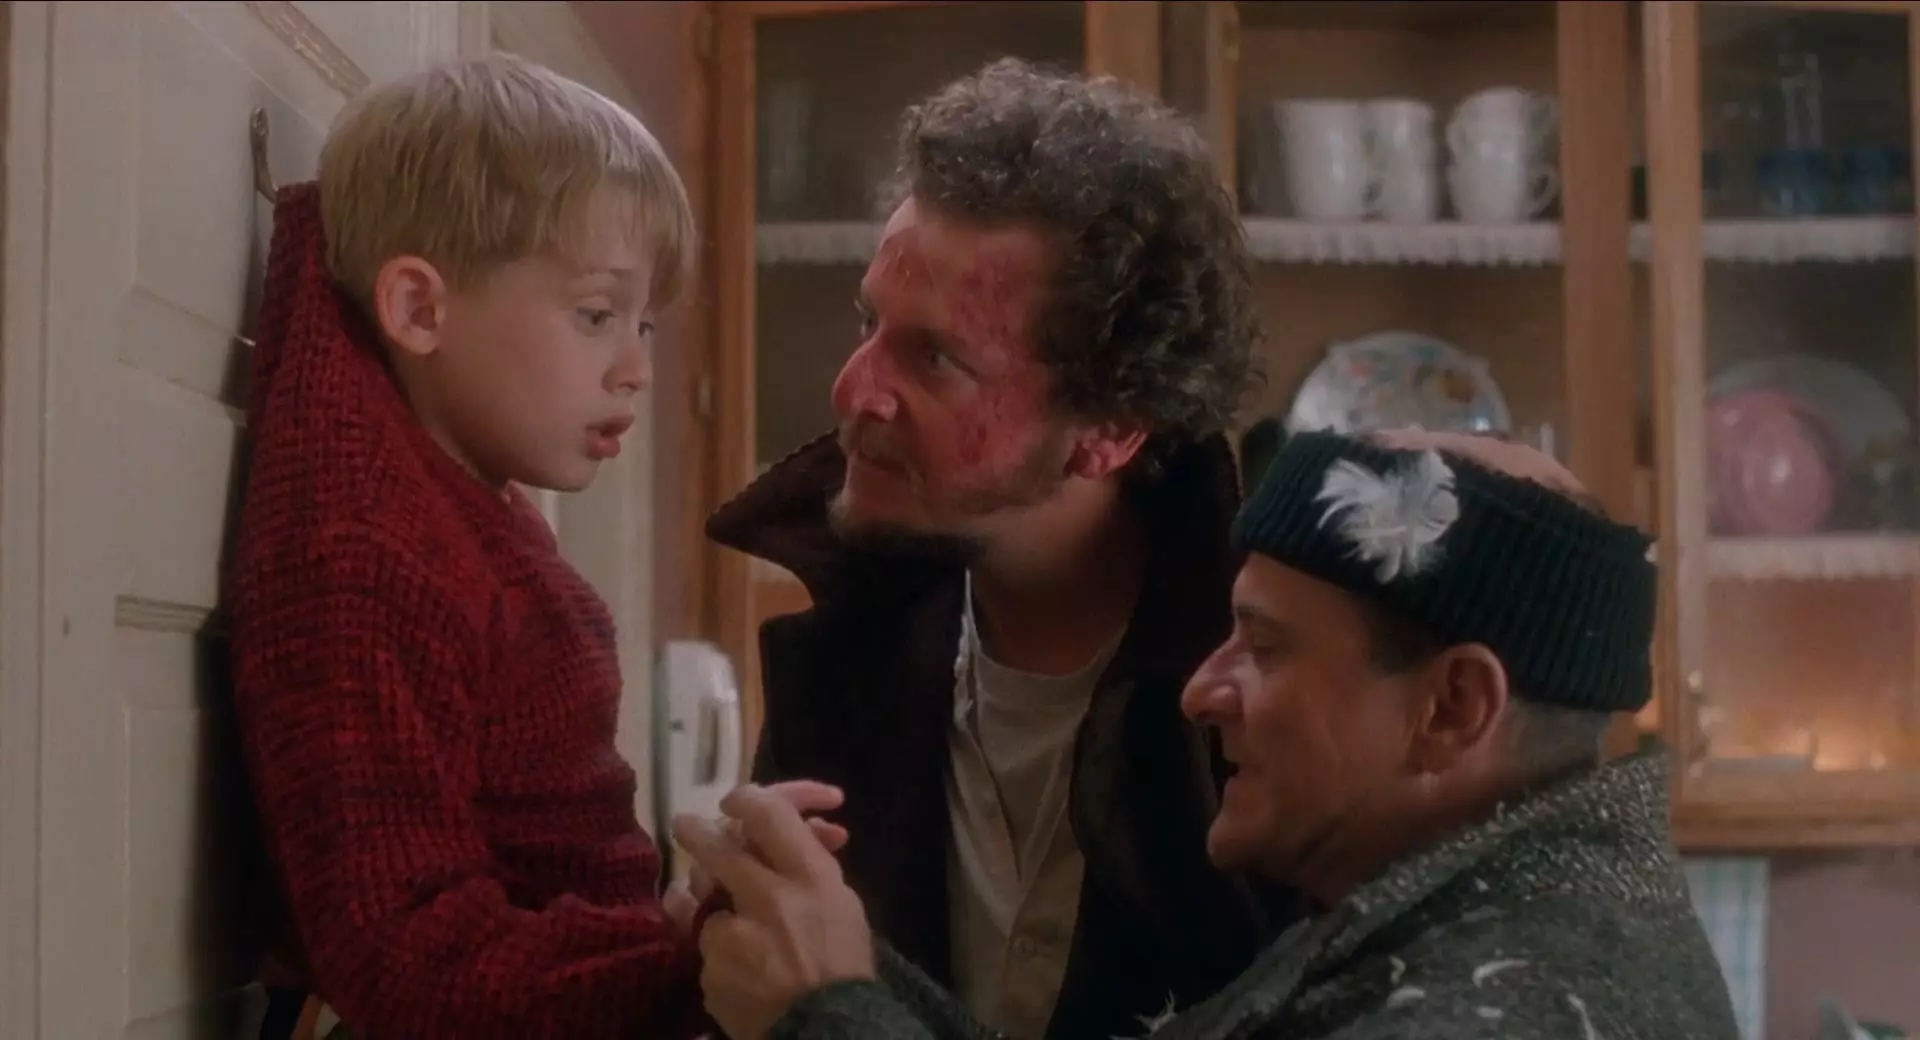 Braydon has been compared to Home Alone's Kevin McCallister.